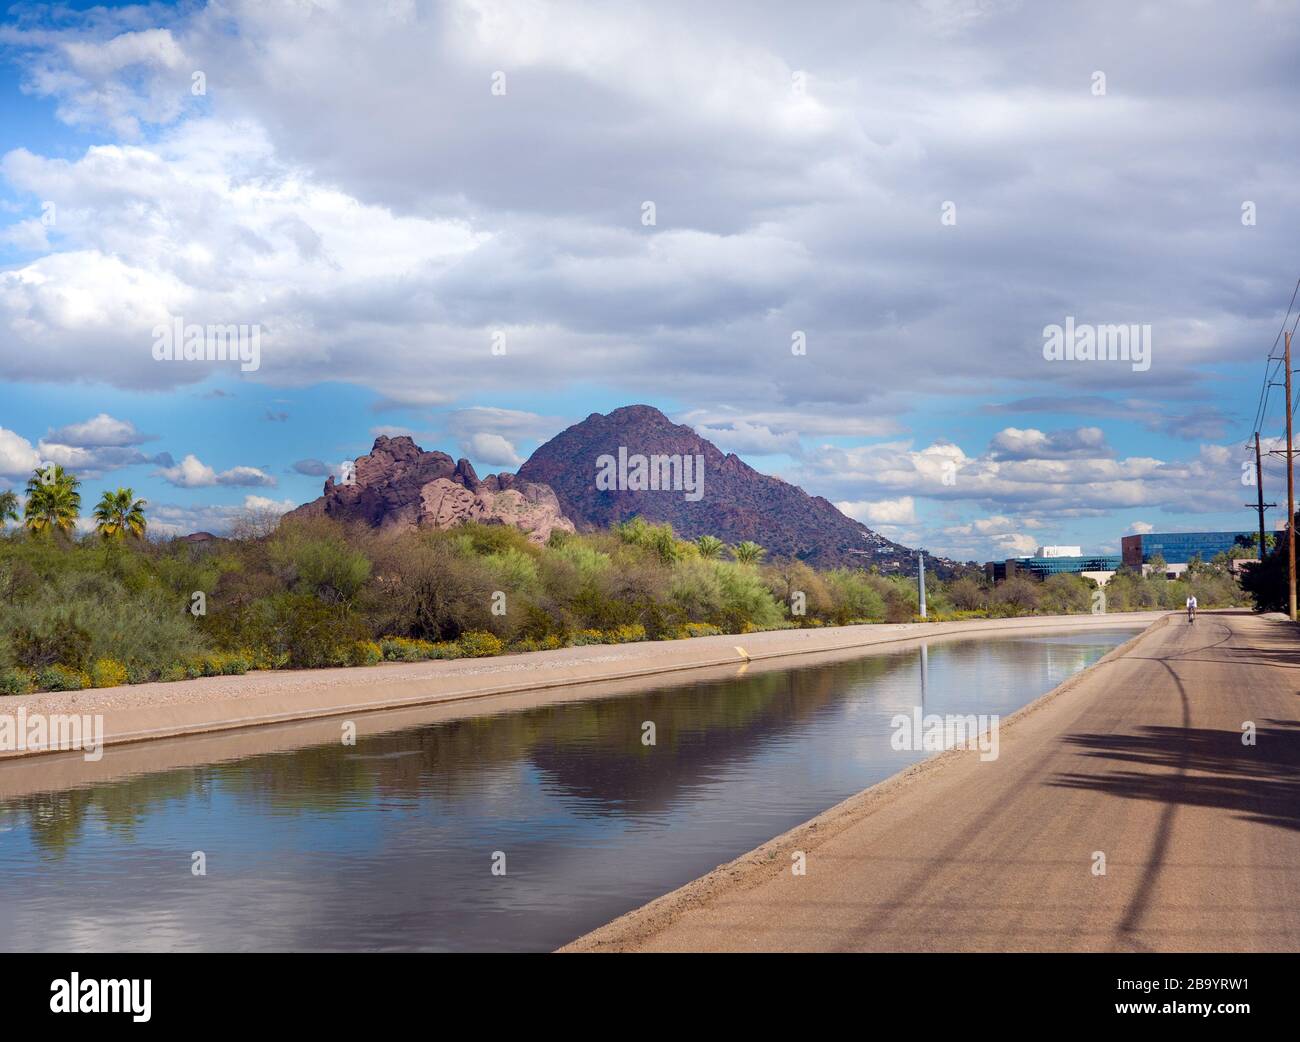 Phoenix Arizona water supply from salt river project. Camelback Mountain in background. Stock Photo